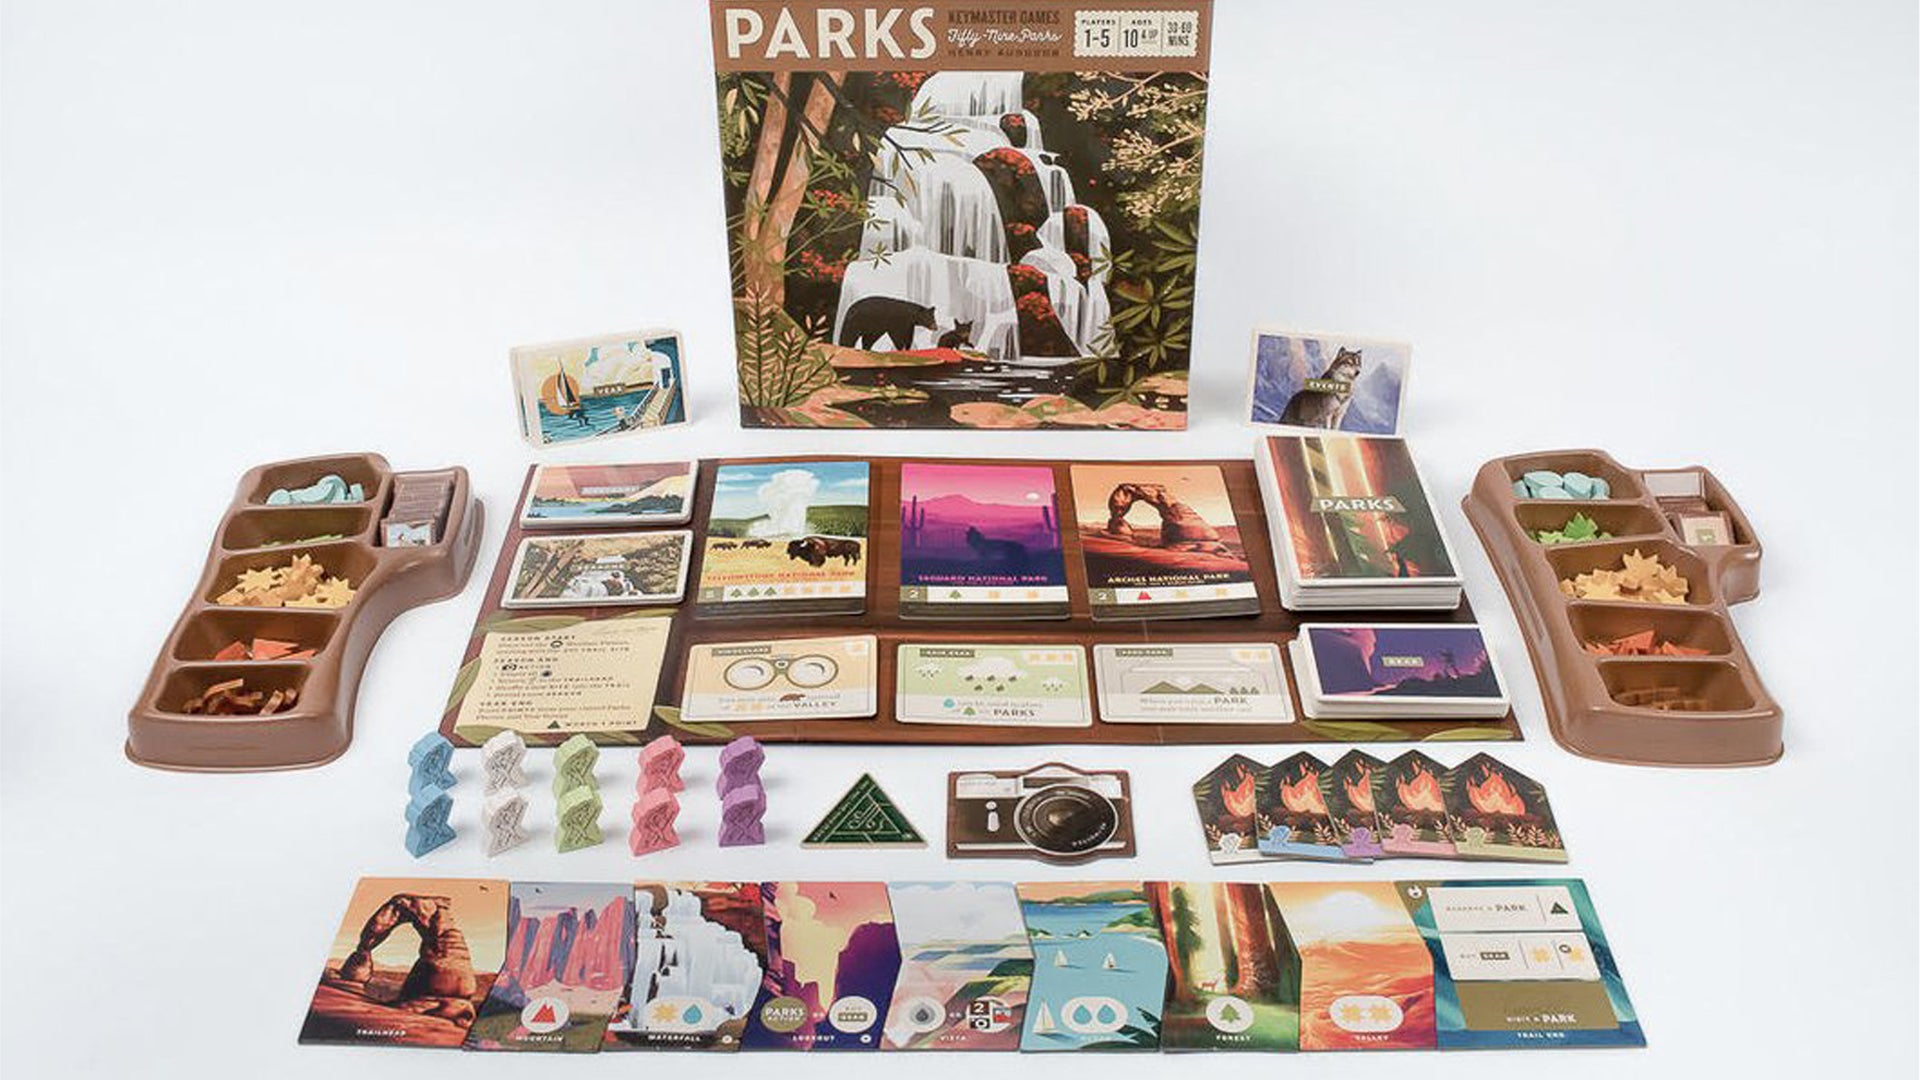 Parks board game layout